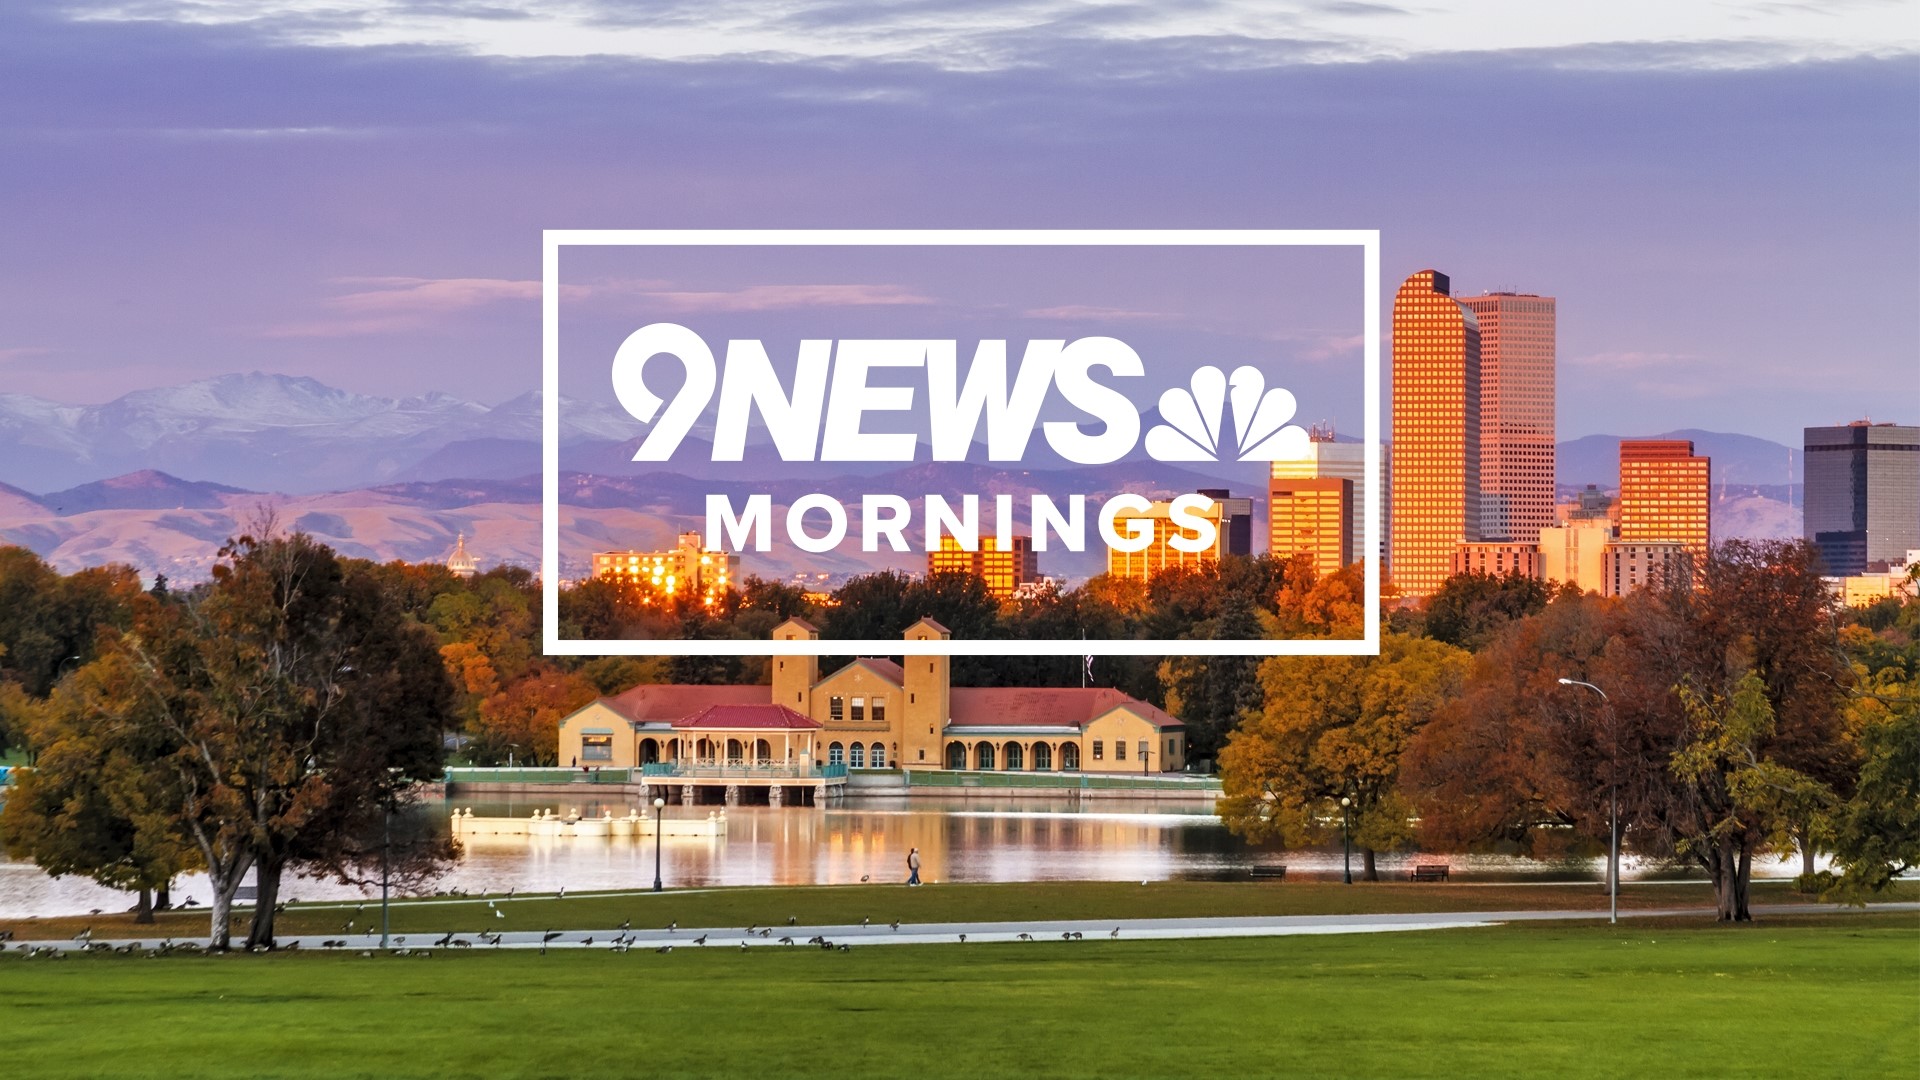 The 9NEWS Morning team provides a look at updated overnight news and developing stories, along with up-to-the-minute weather forecasts and live traffic conditions.